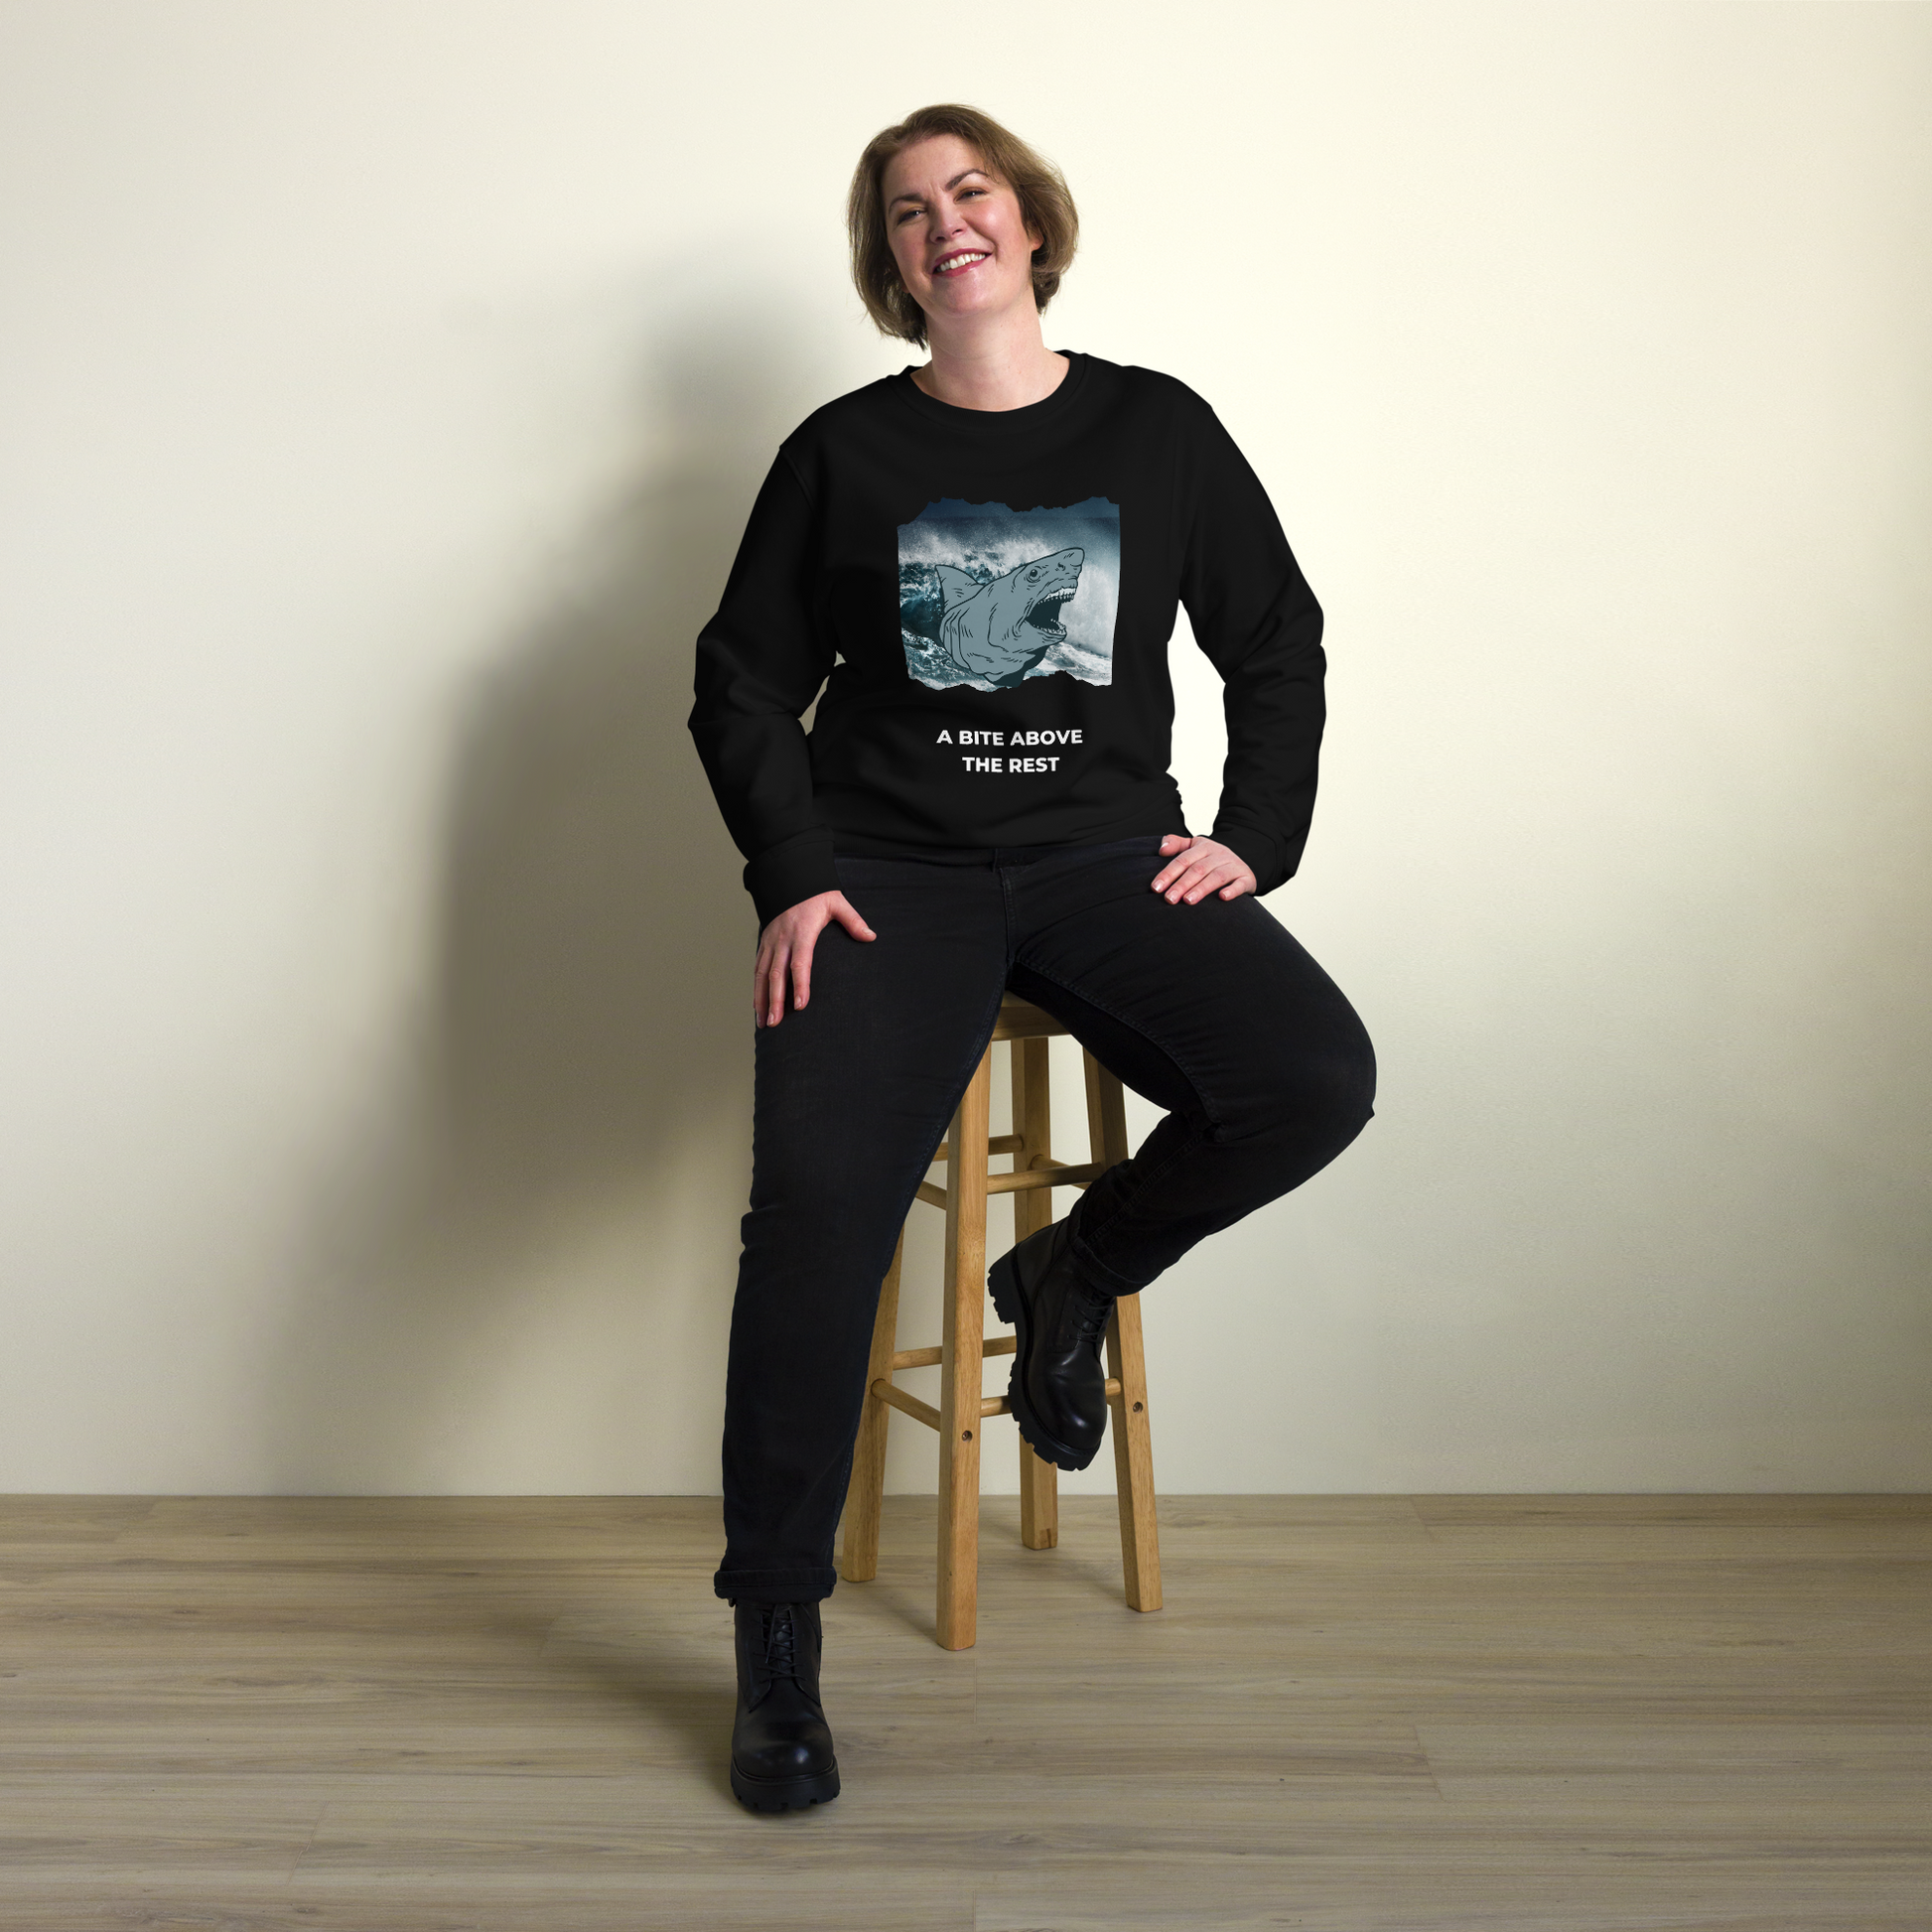 Smiling woman wearing a Black Organic Cotton Megalodon Sweatshirt featuring the jaw-dropping 'A Bite Above the Rest' graphic on the chest - Funny Graphic Megalodon Sweatshirts - Boozy Fox